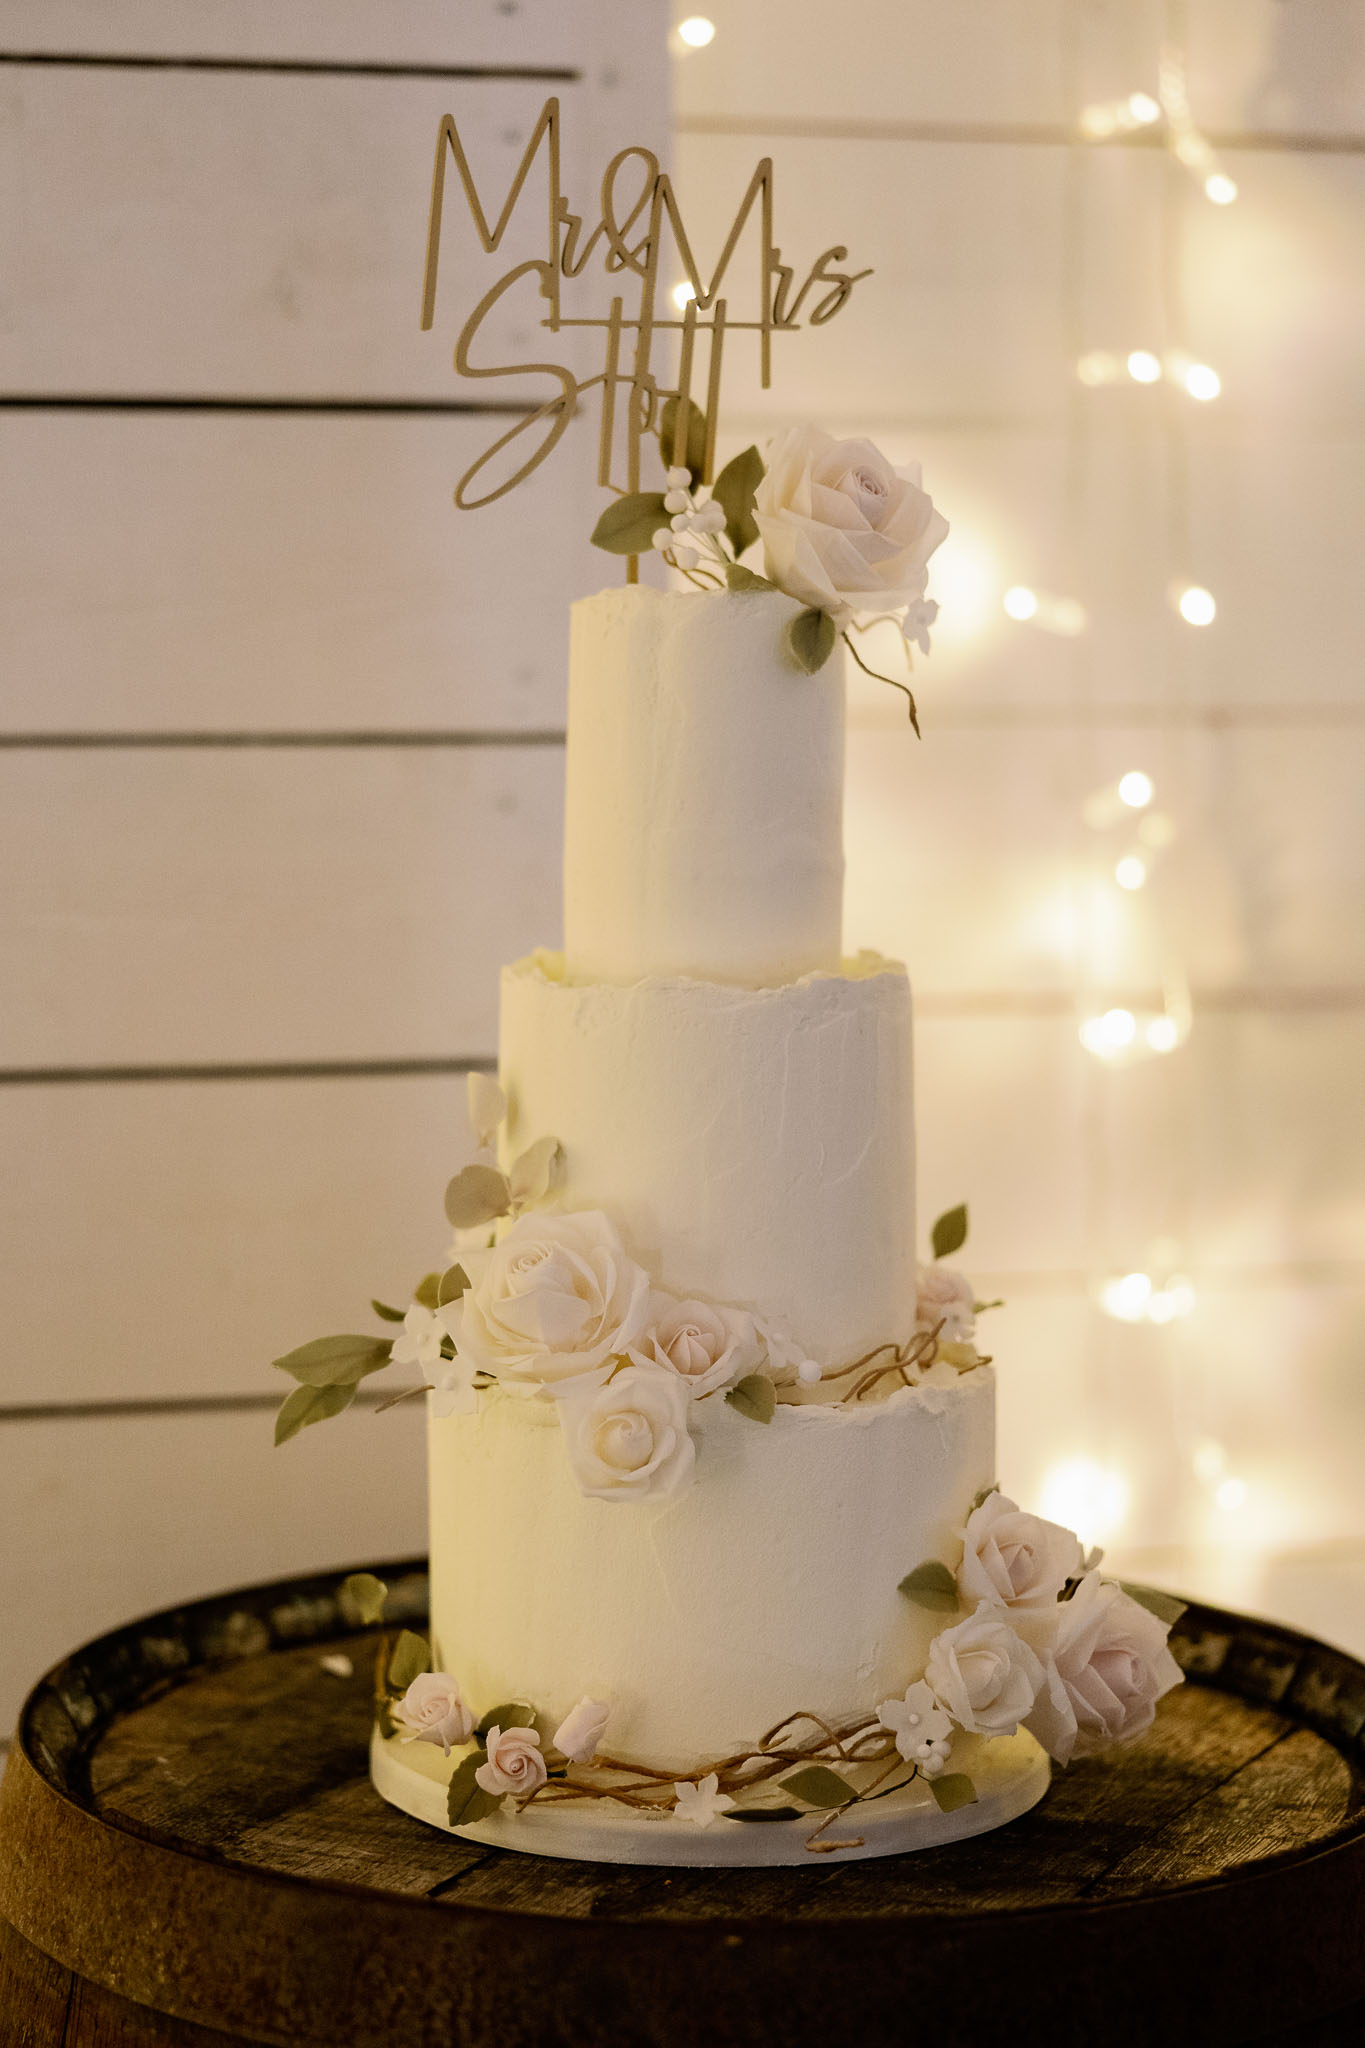 3 Tier Wedding cake at the Normans Wedding Barn in North Yorkshire